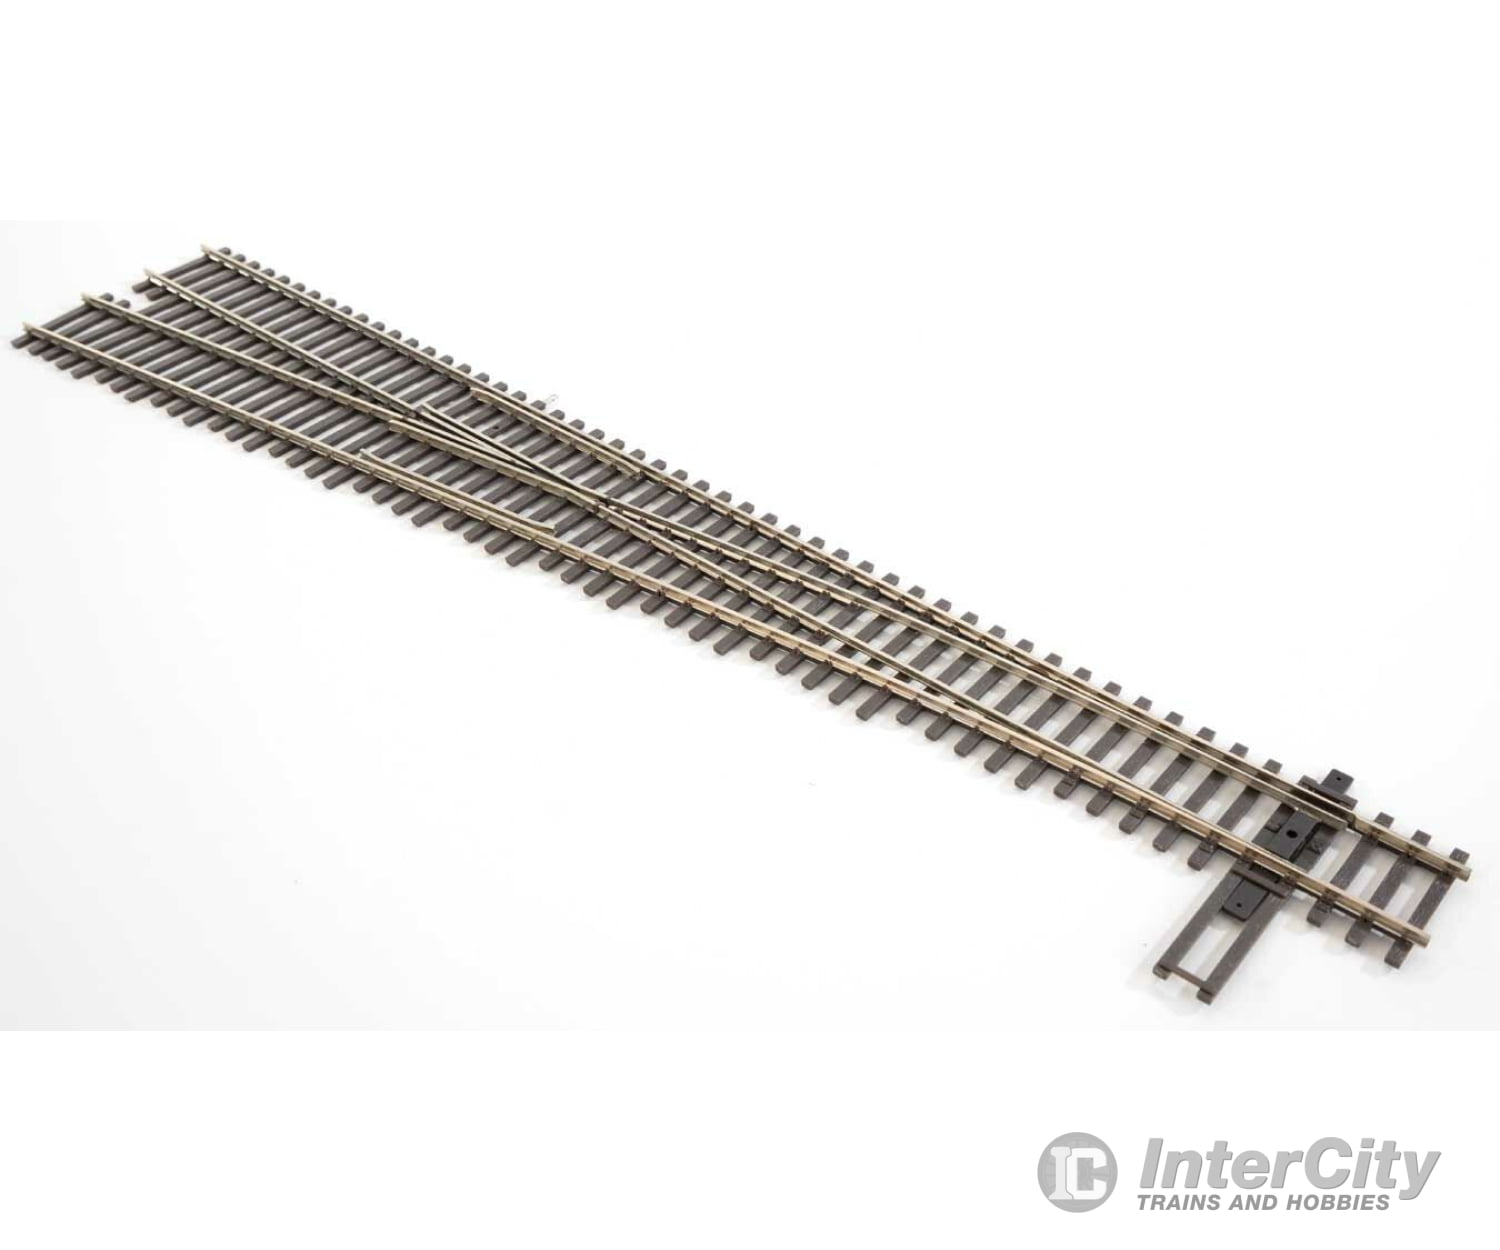 Walthers Shinohara Track Ho 83019 Code 83 Nickel Silver Dcc-Friendly #8 Turnout -- Left Hand &